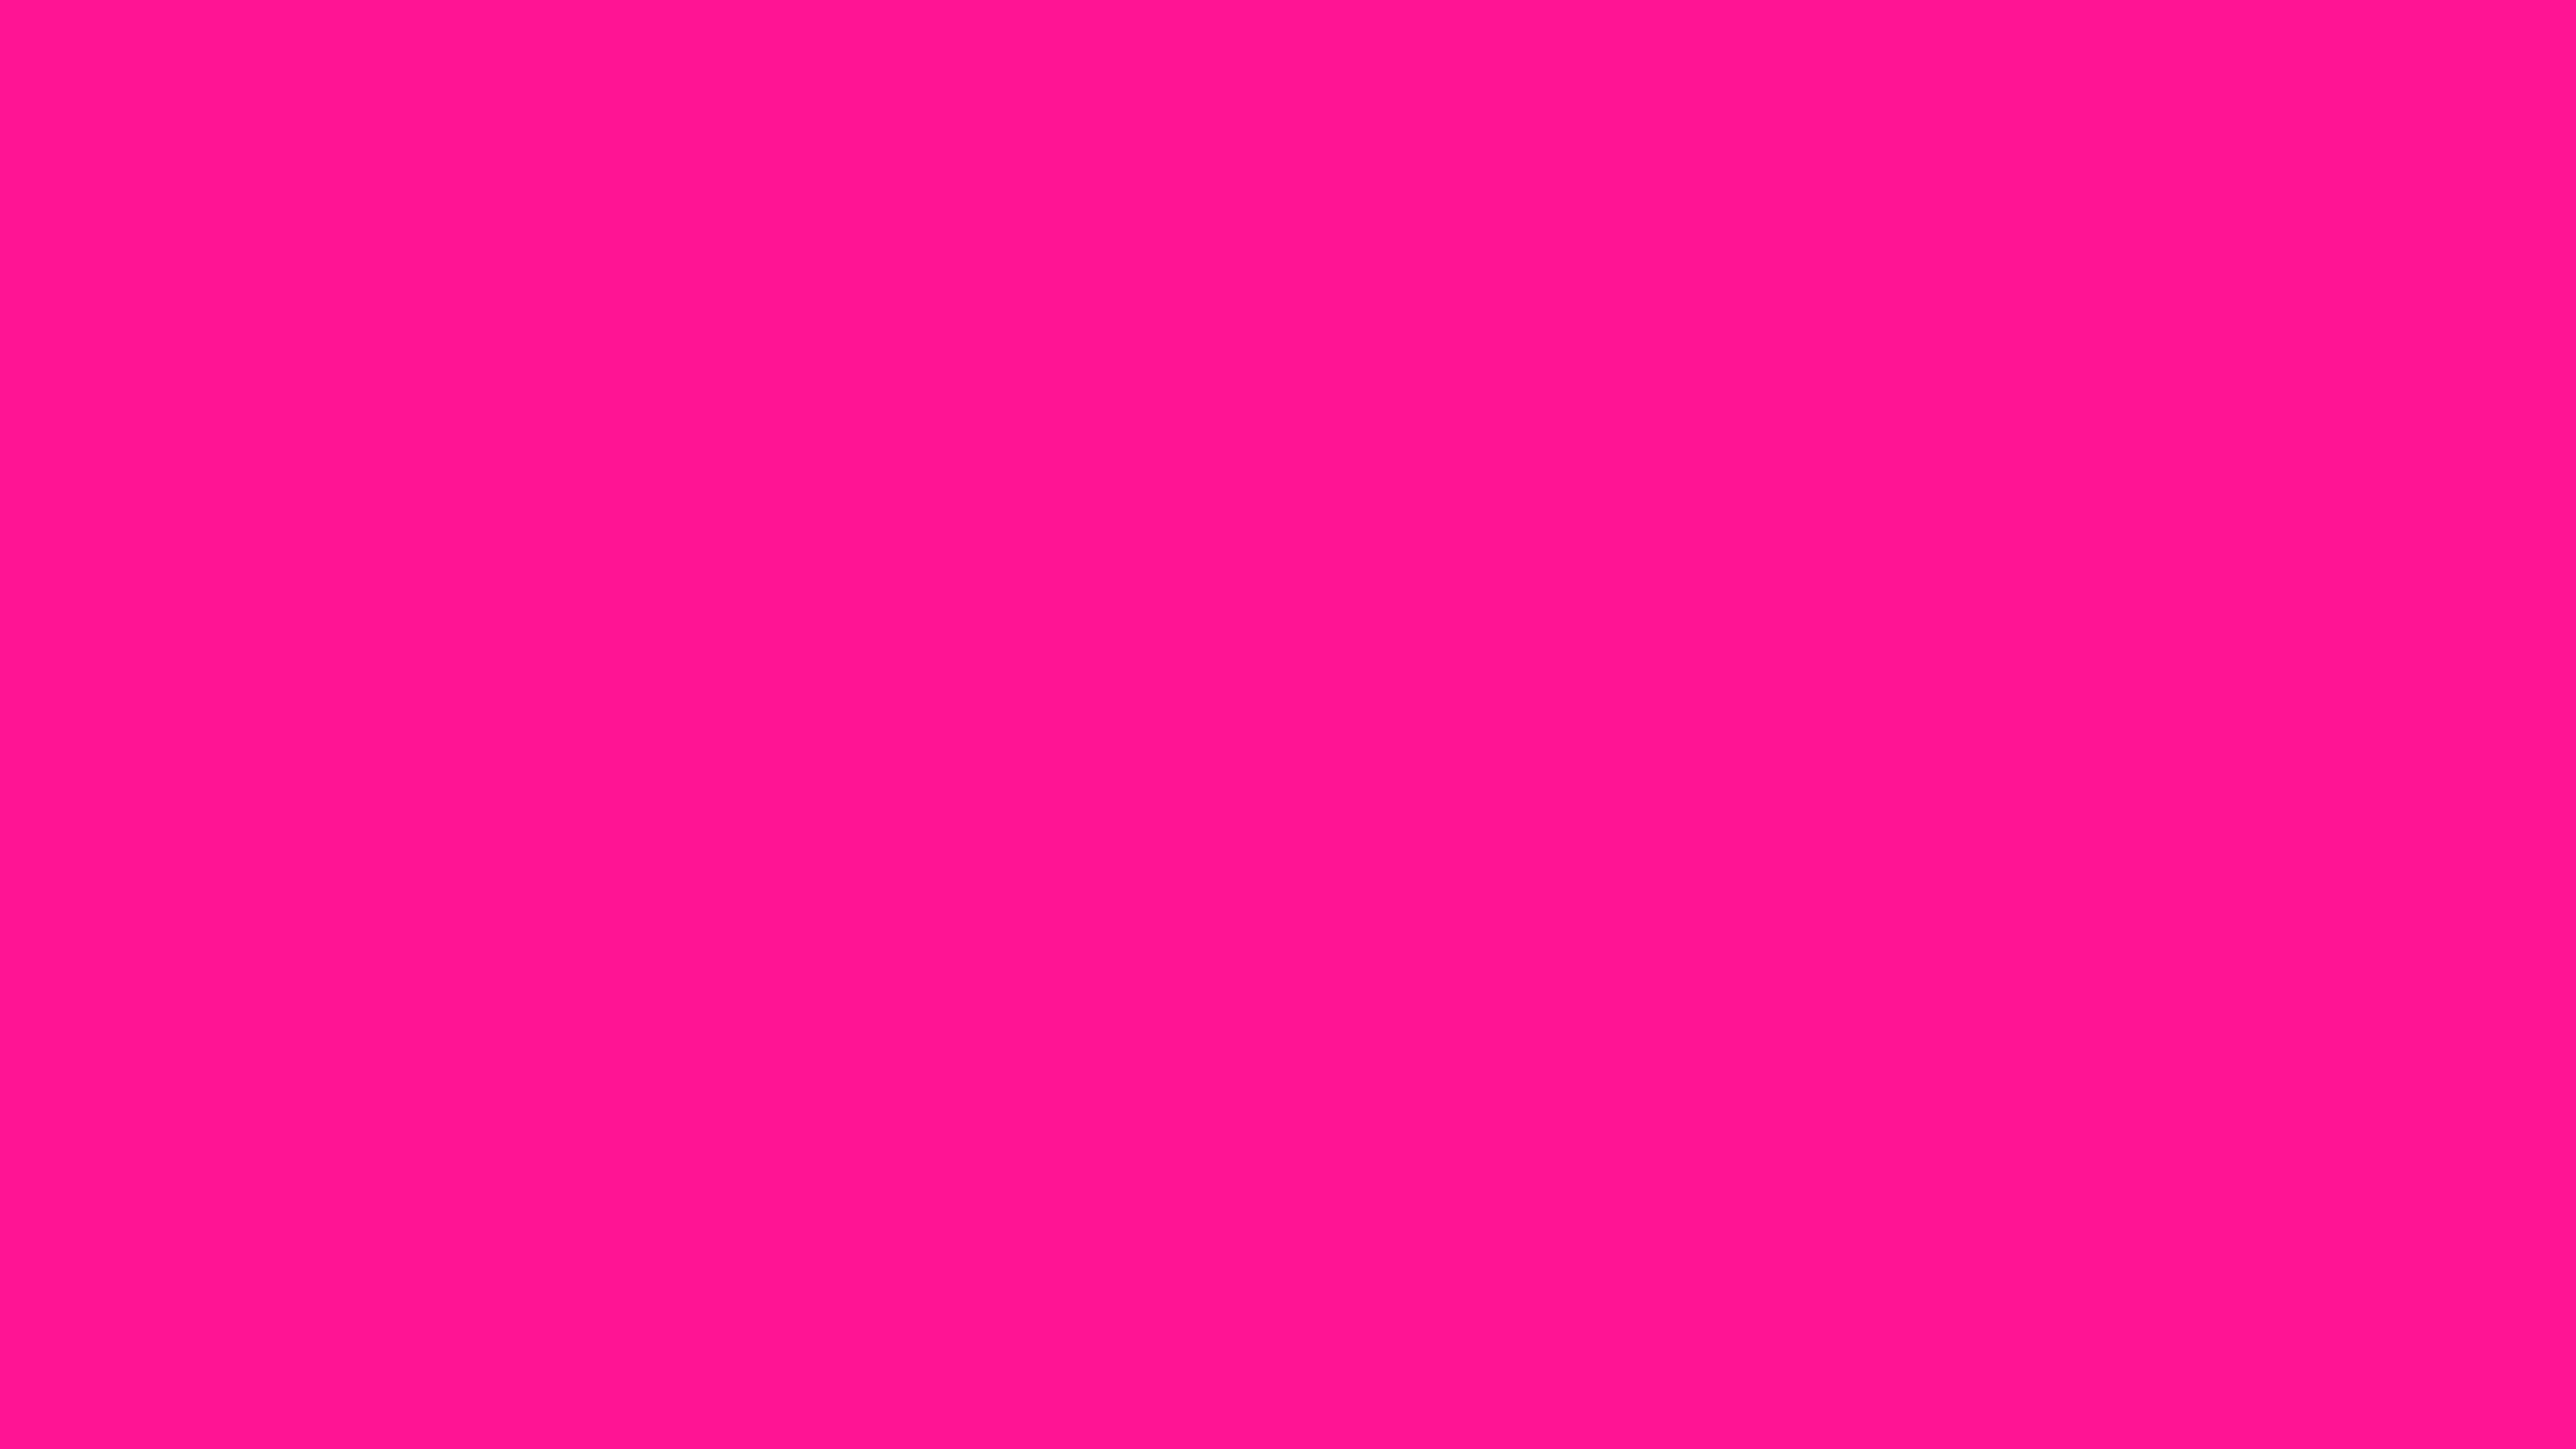 4096x2304 Deep Pink Solid Color Background